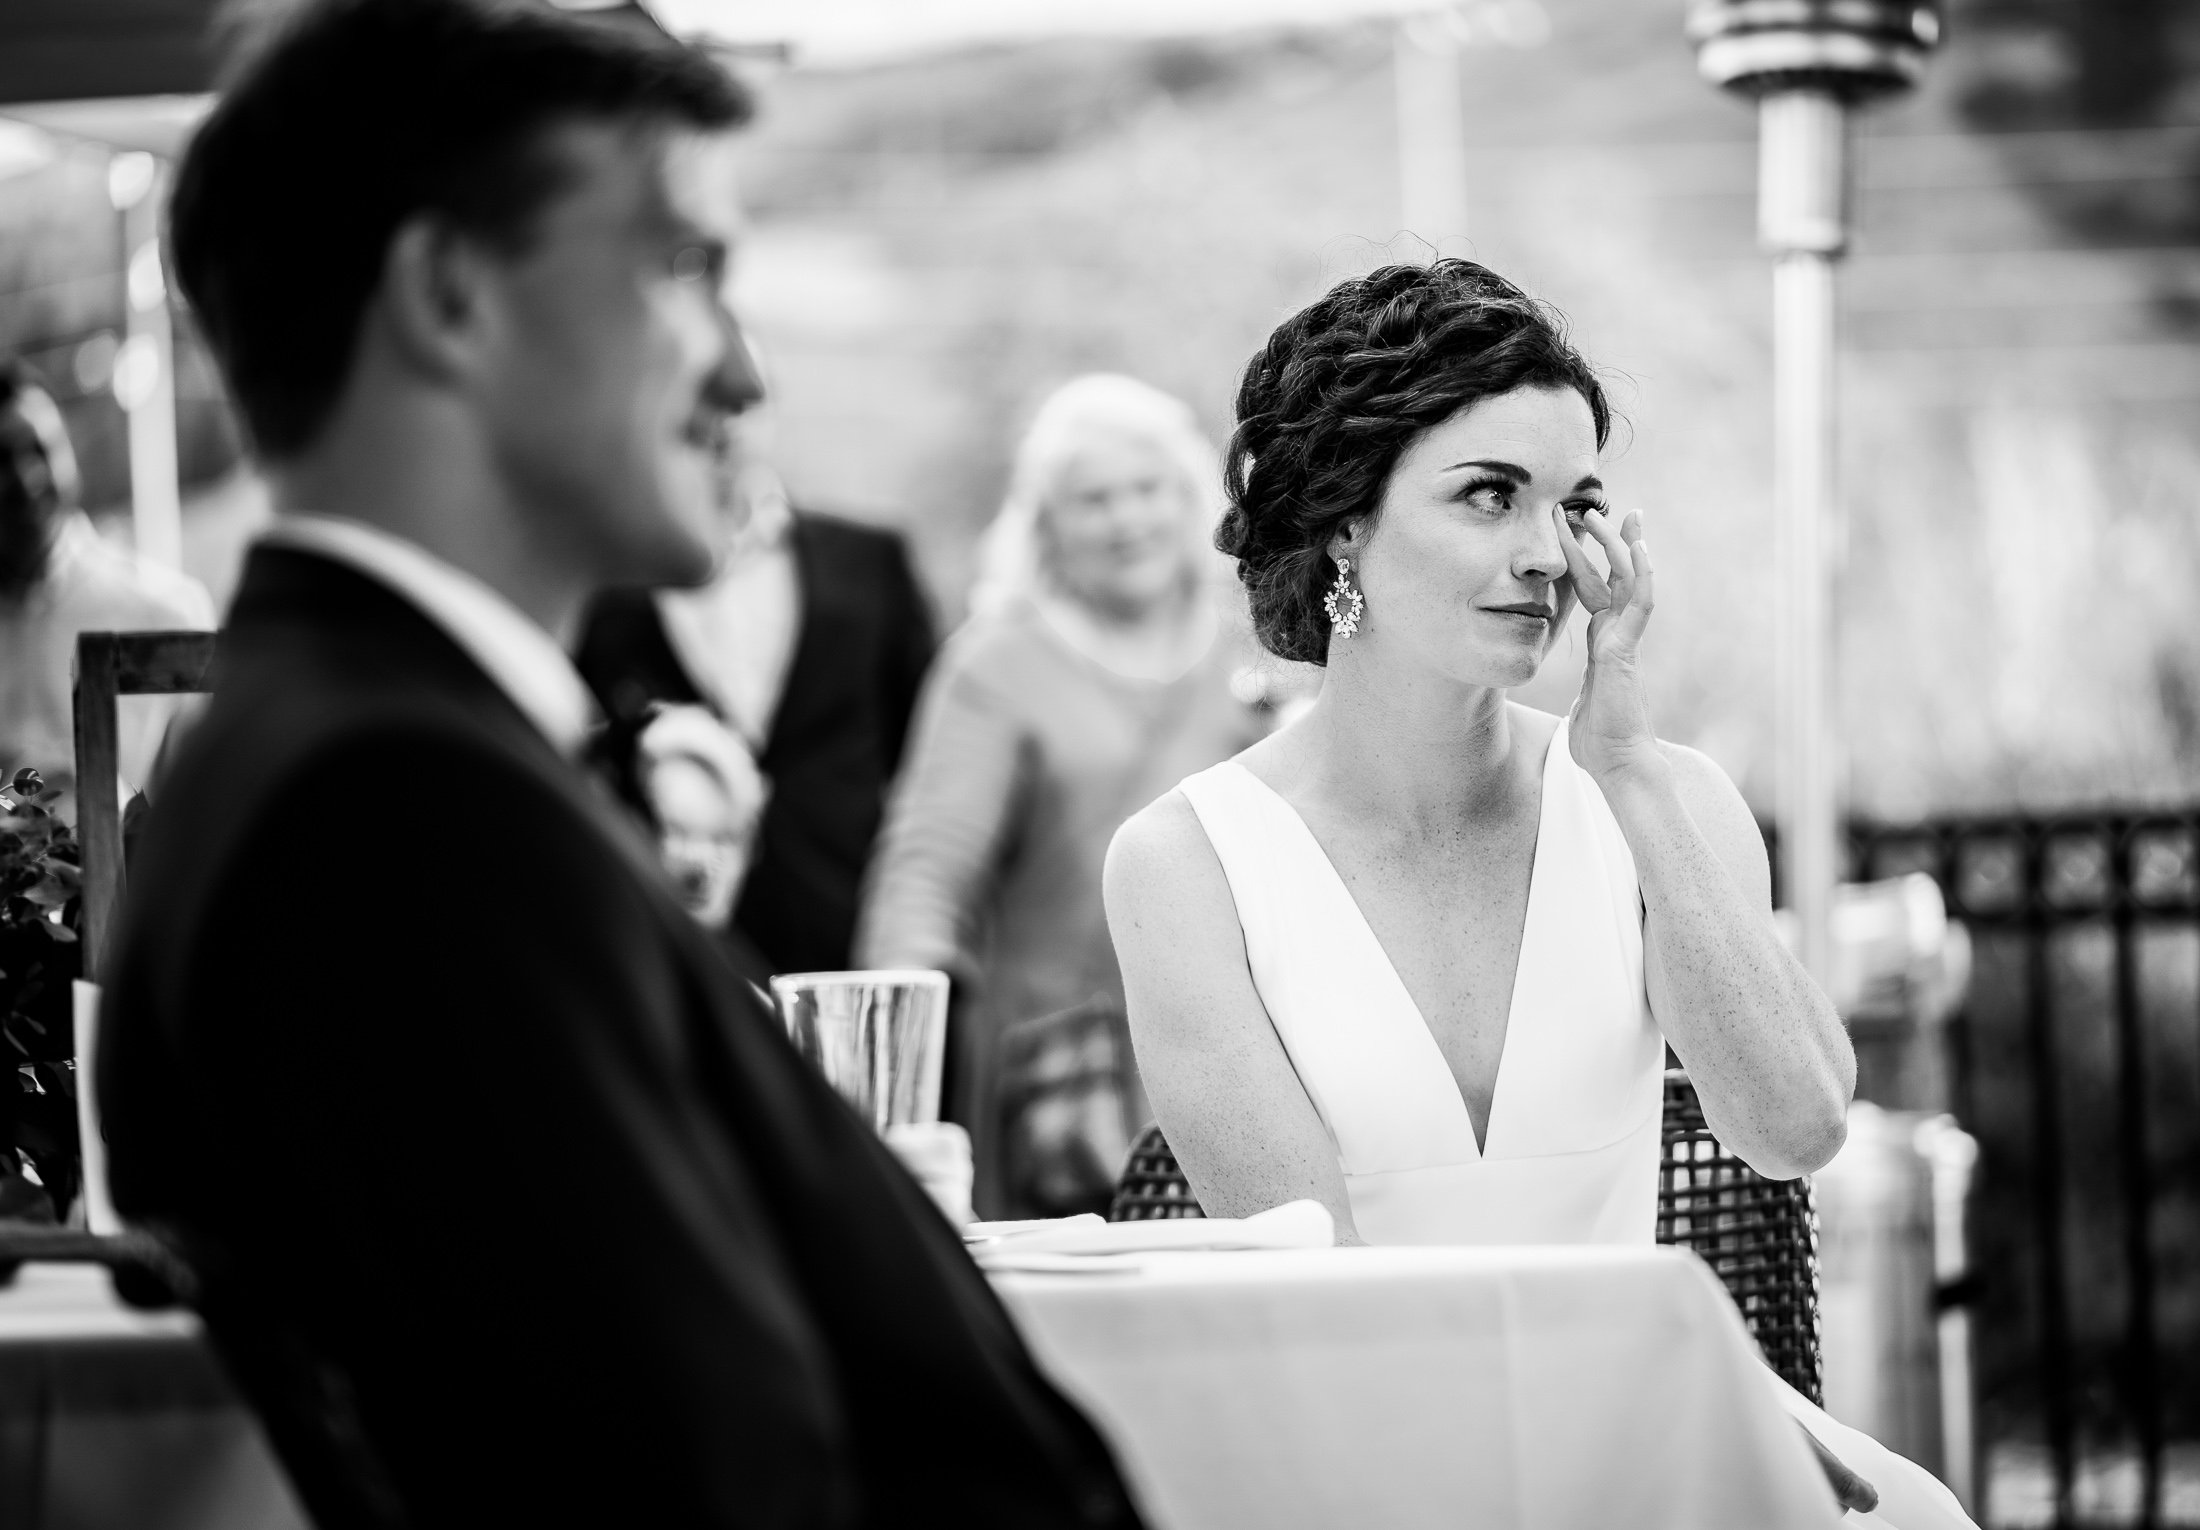 Bride and groom react to reception speeches while sitting on outdoor patio during the wedding reception, wedding, wedding photos, wedding photography, wedding photographer, wedding inspiration, wedding photo inspiration, wedding portraits, wedding ceremony, wedding reception, mountain wedding, Catholic Church wedding, Catholic Church wedding photos, Catholic Church wedding photography, Catholic Church wedding photographer, Catholic Church wedding inspiration, Catholic Church wedding venue, Steamboat Springs wedding, Steamboat Springs wedding photos, Steamboat Springs wedding photography, Steamboat Springs wedding photographer, Colorado wedding, Colorado wedding photos, Colorado wedding photography, Colorado wedding photographer, Colorado mountain wedding, Colorado wedding inspiration